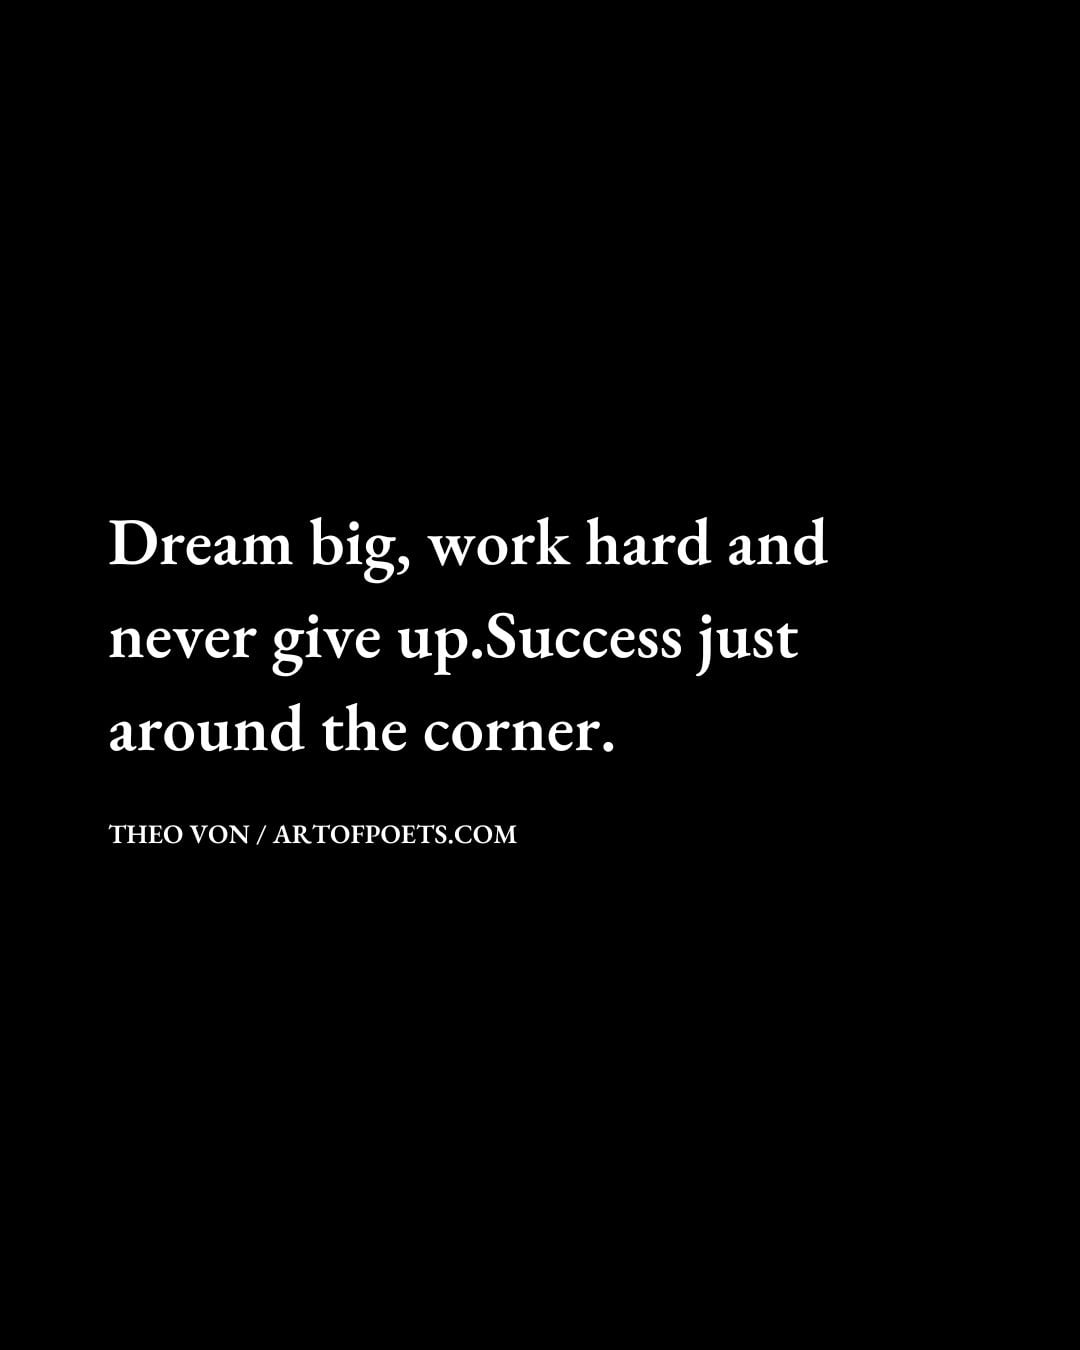 Dream big work hard and never give up. Success is just around the corner